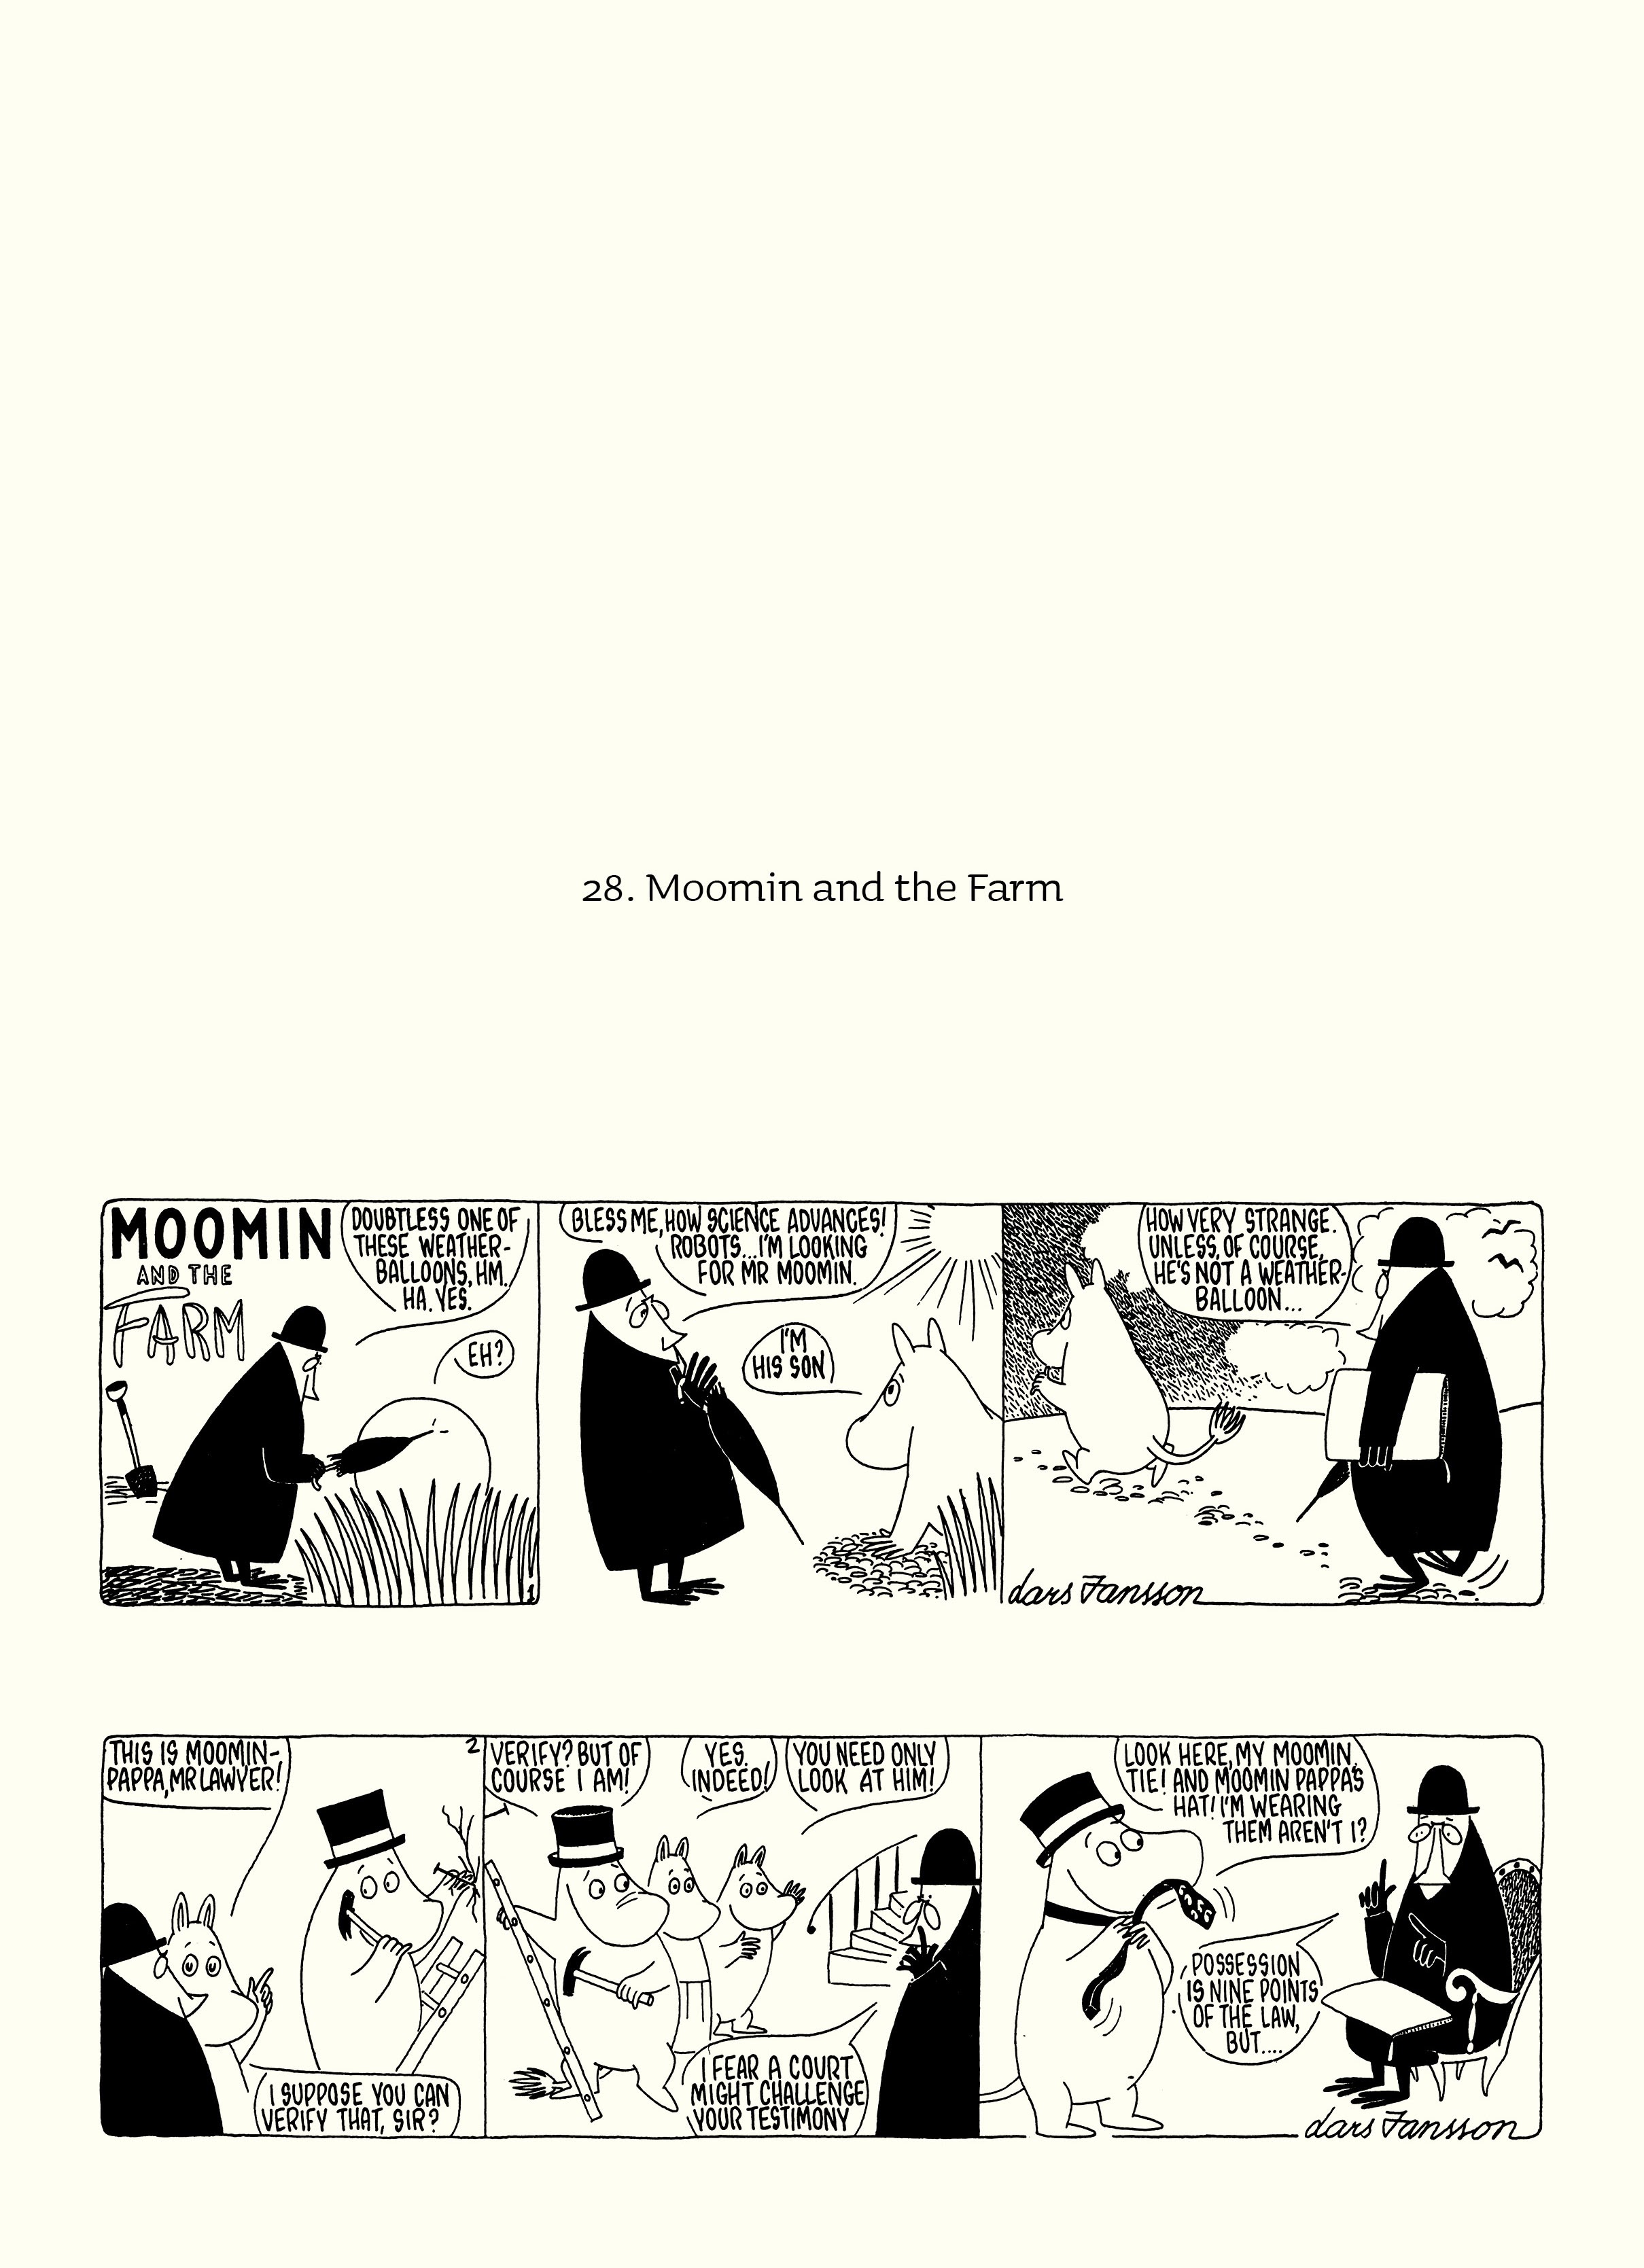 Read online Moomin: The Complete Lars Jansson Comic Strip comic -  Issue # TPB 7 - 48